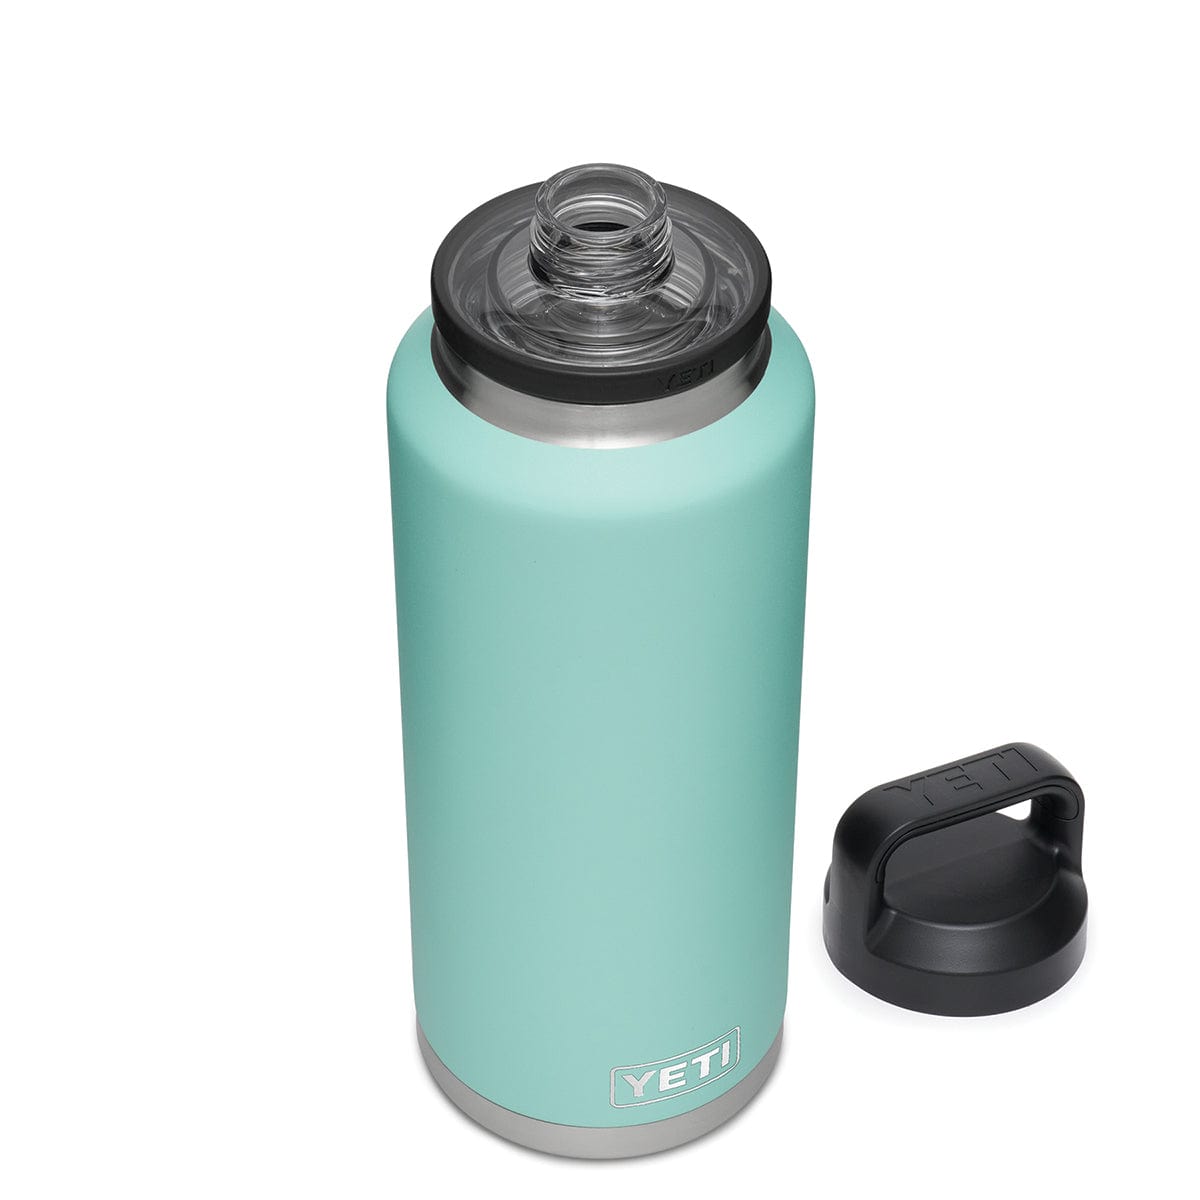 YETI Rambler 46 oz. Water Bottle with Chug Cap at Tractor Supply Co.